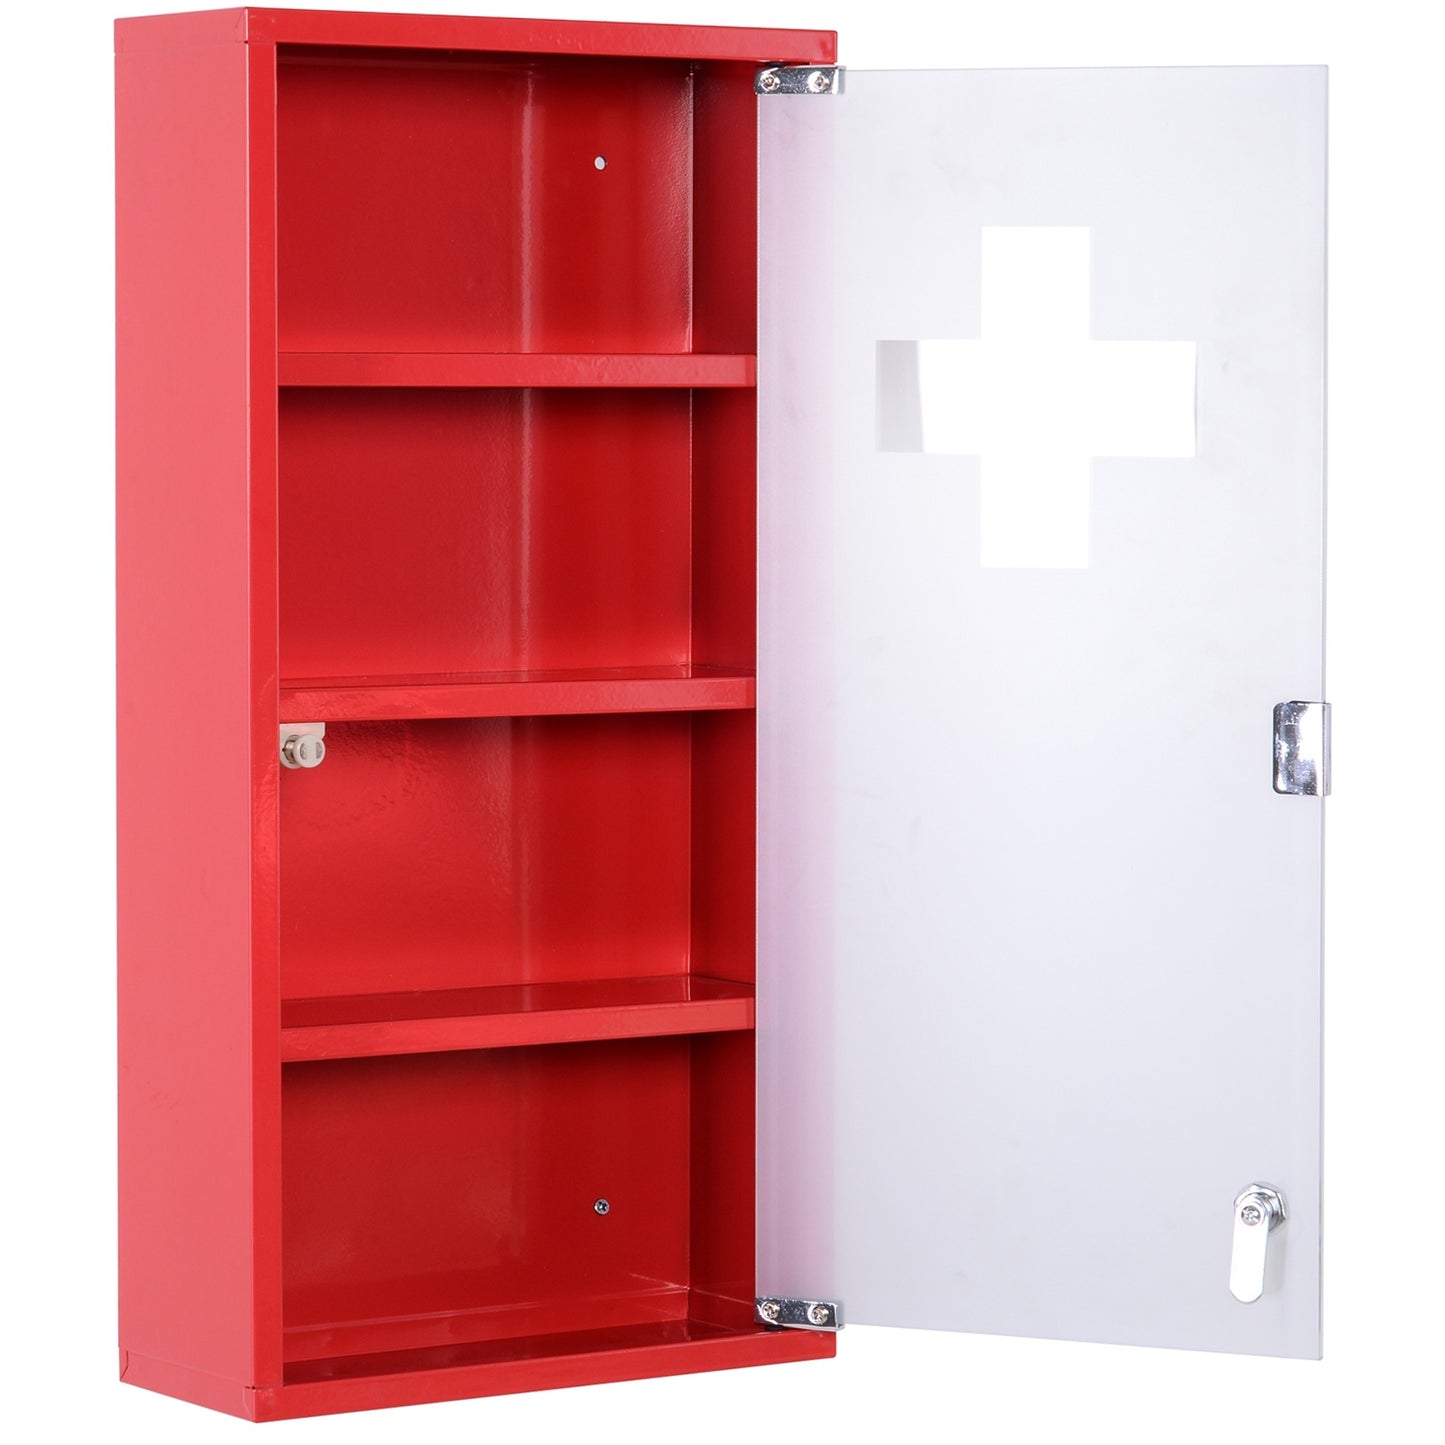 Nancy's Medicine Cabinet - Stainless Steel - Looking glass - Satin finished - Lock - 30 x 12 x 60 cm - Silver - Red 